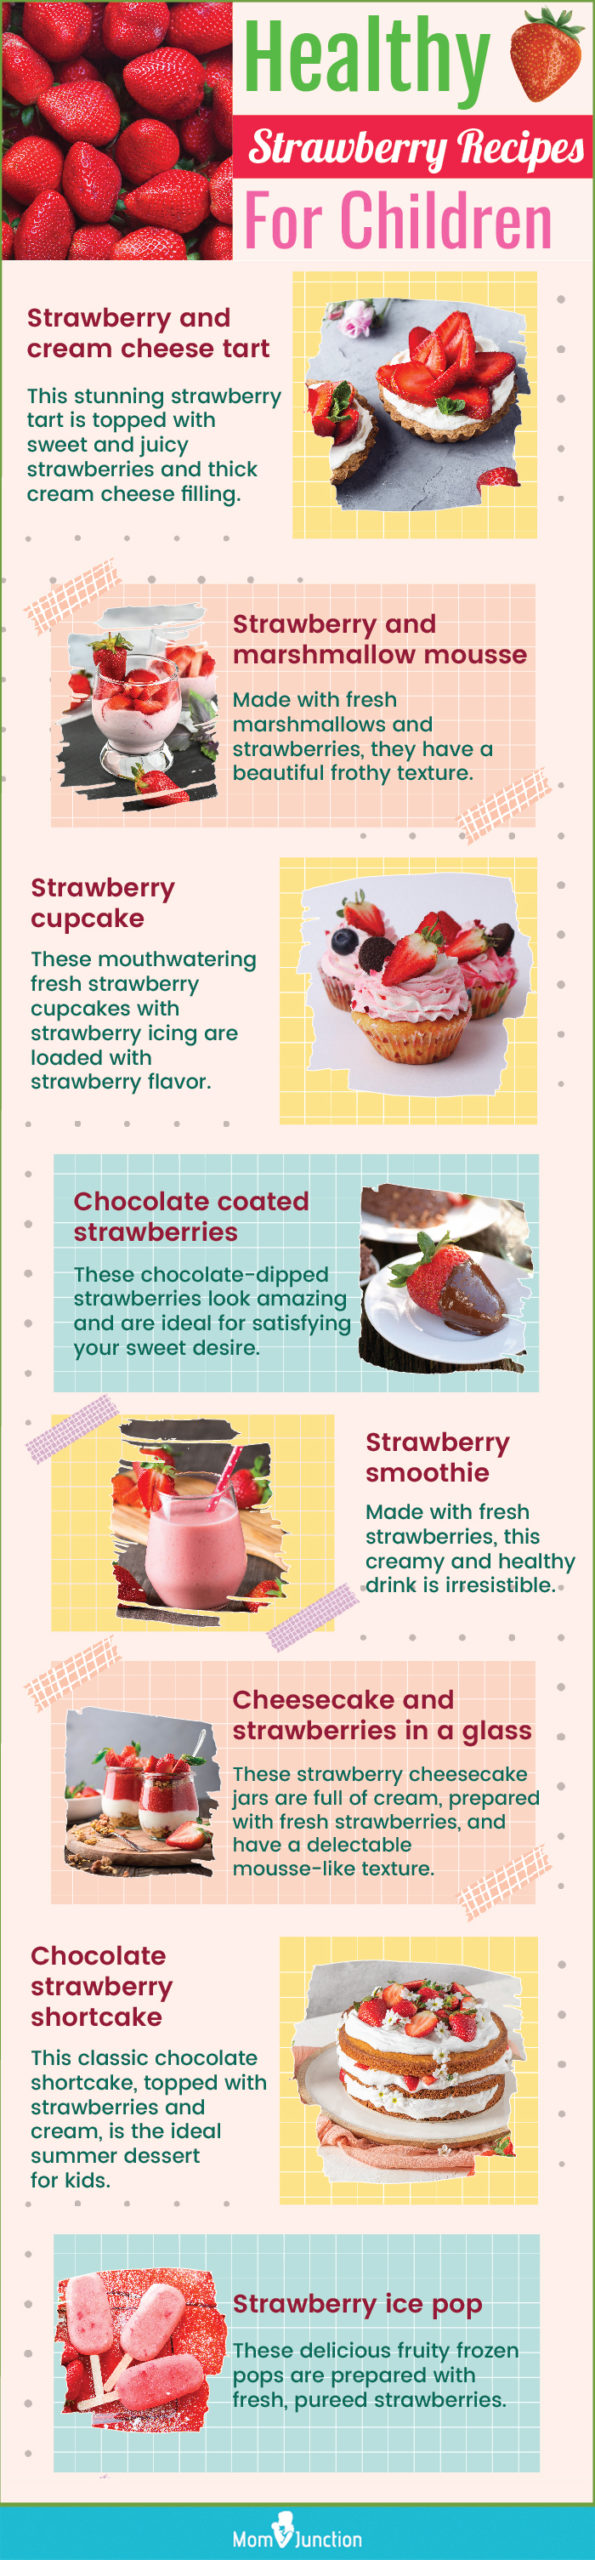 strawberry recipes for children (infographic)